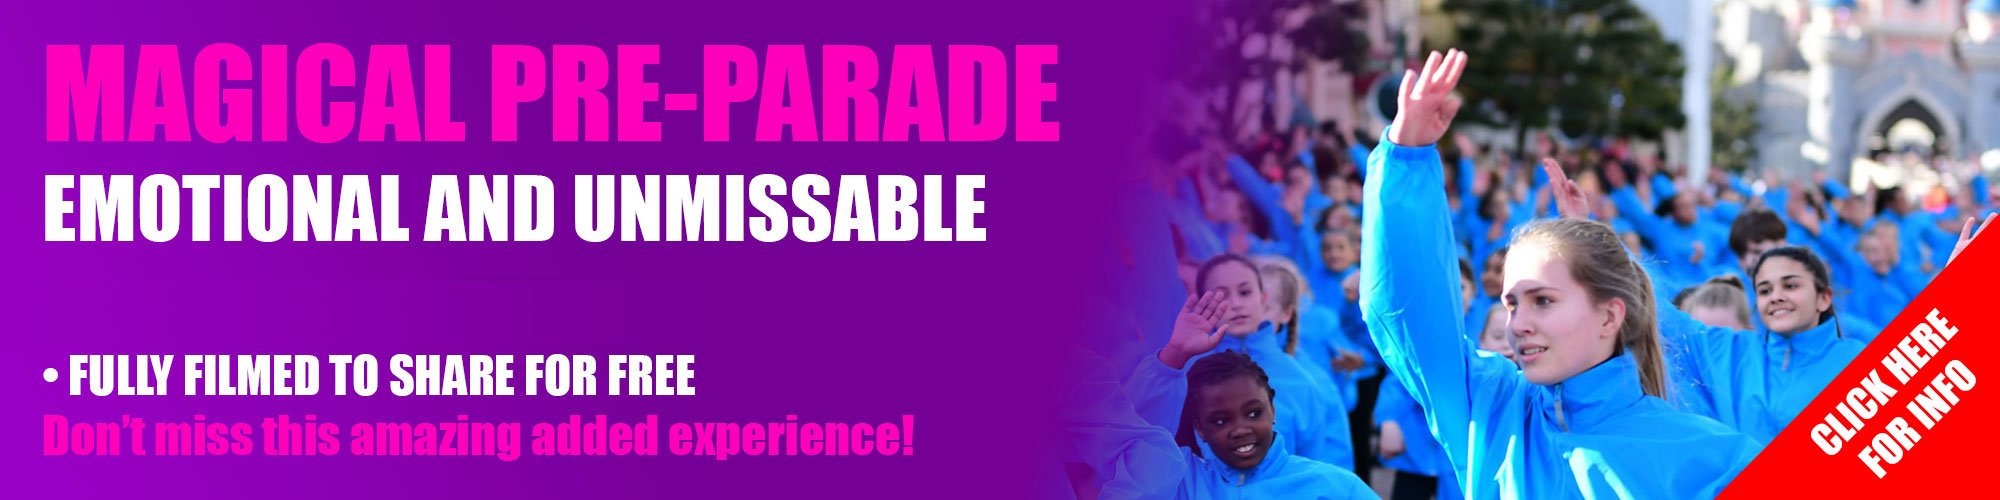 Ever dreamed of being part of Disney's Parade programme? Want to join dancers from all over the world in a specially choreographed pre-parade through the Disneyland Park? Then IFDPA is the event for you. Every IFDPA group is given the option to take part in our amazing pre-parade.